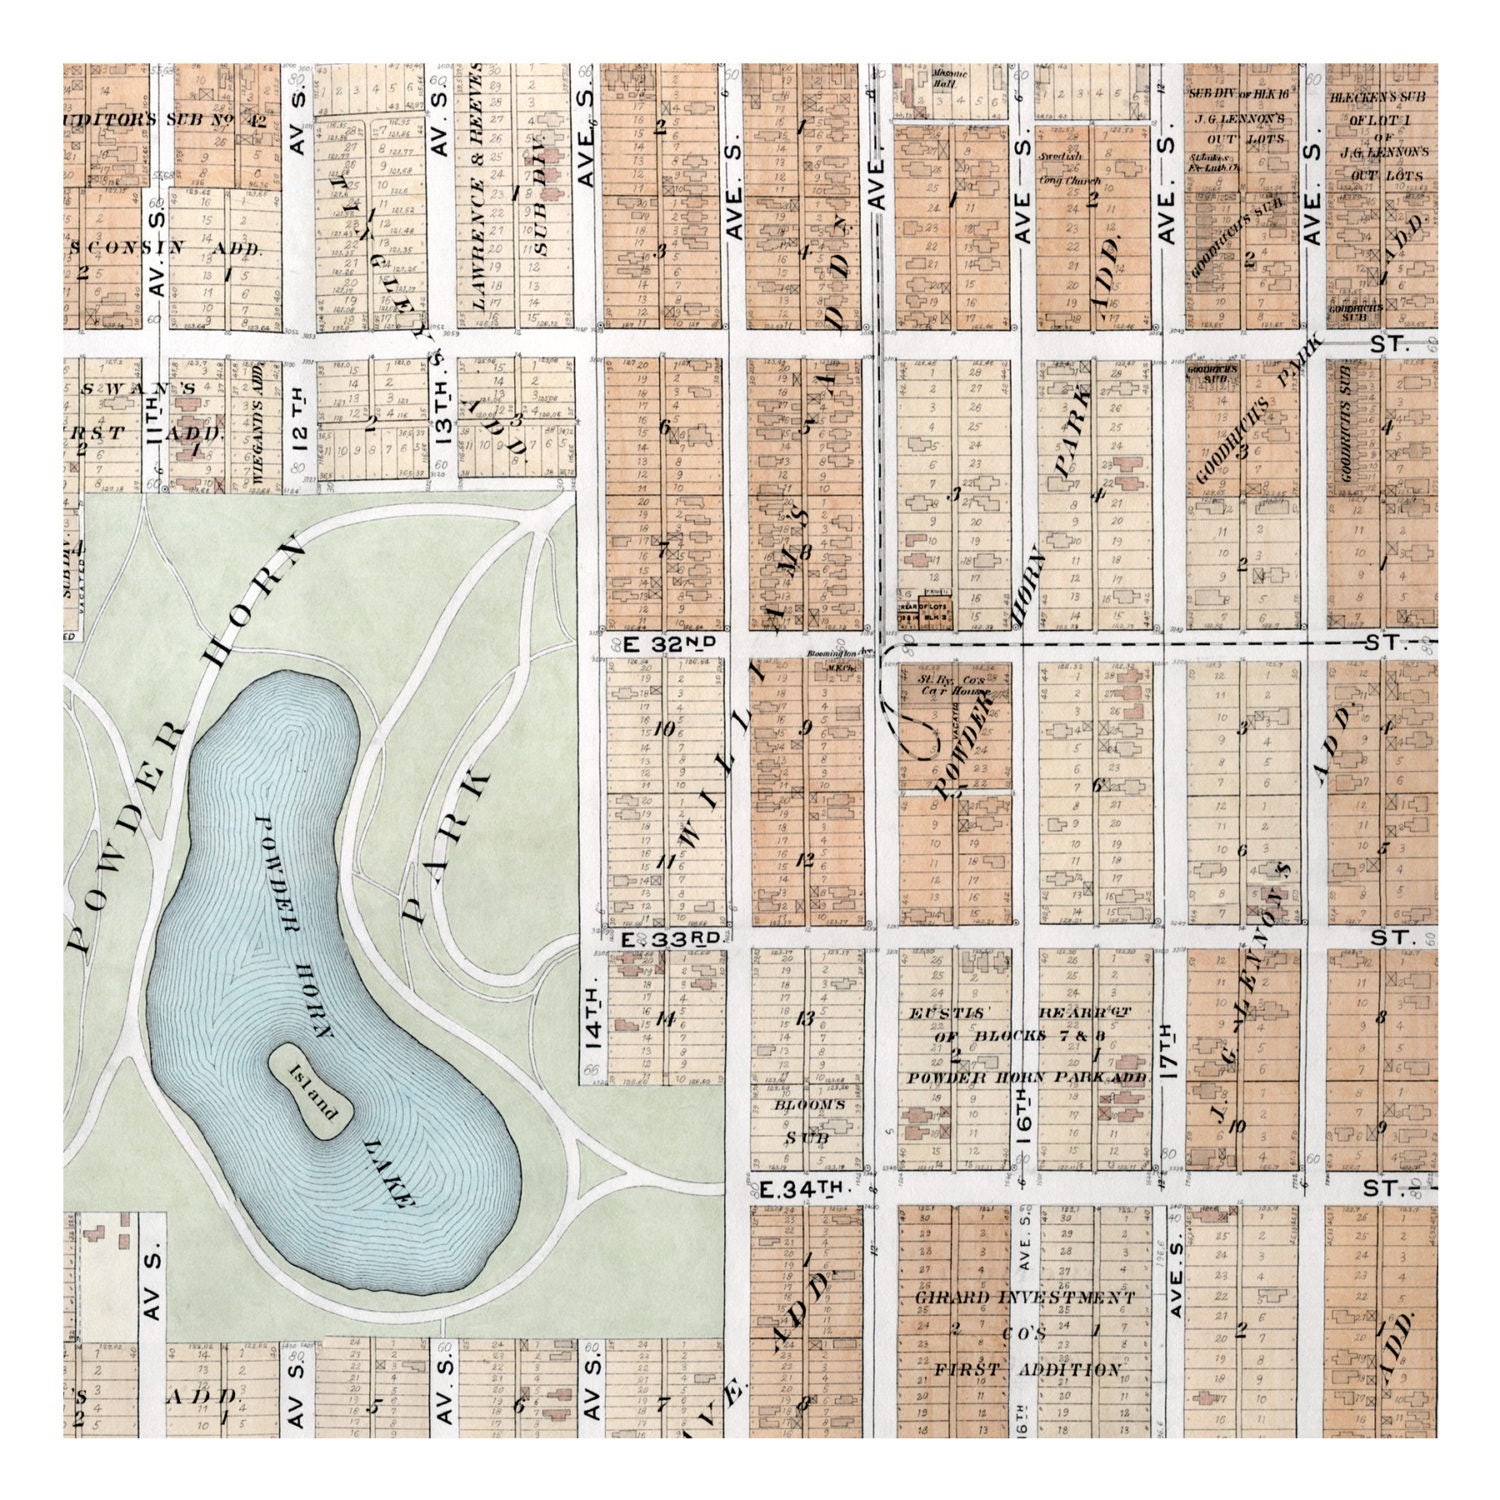 Hand Painted Map of Minneapolis 1903 / Powderhorn Park and Lake pic